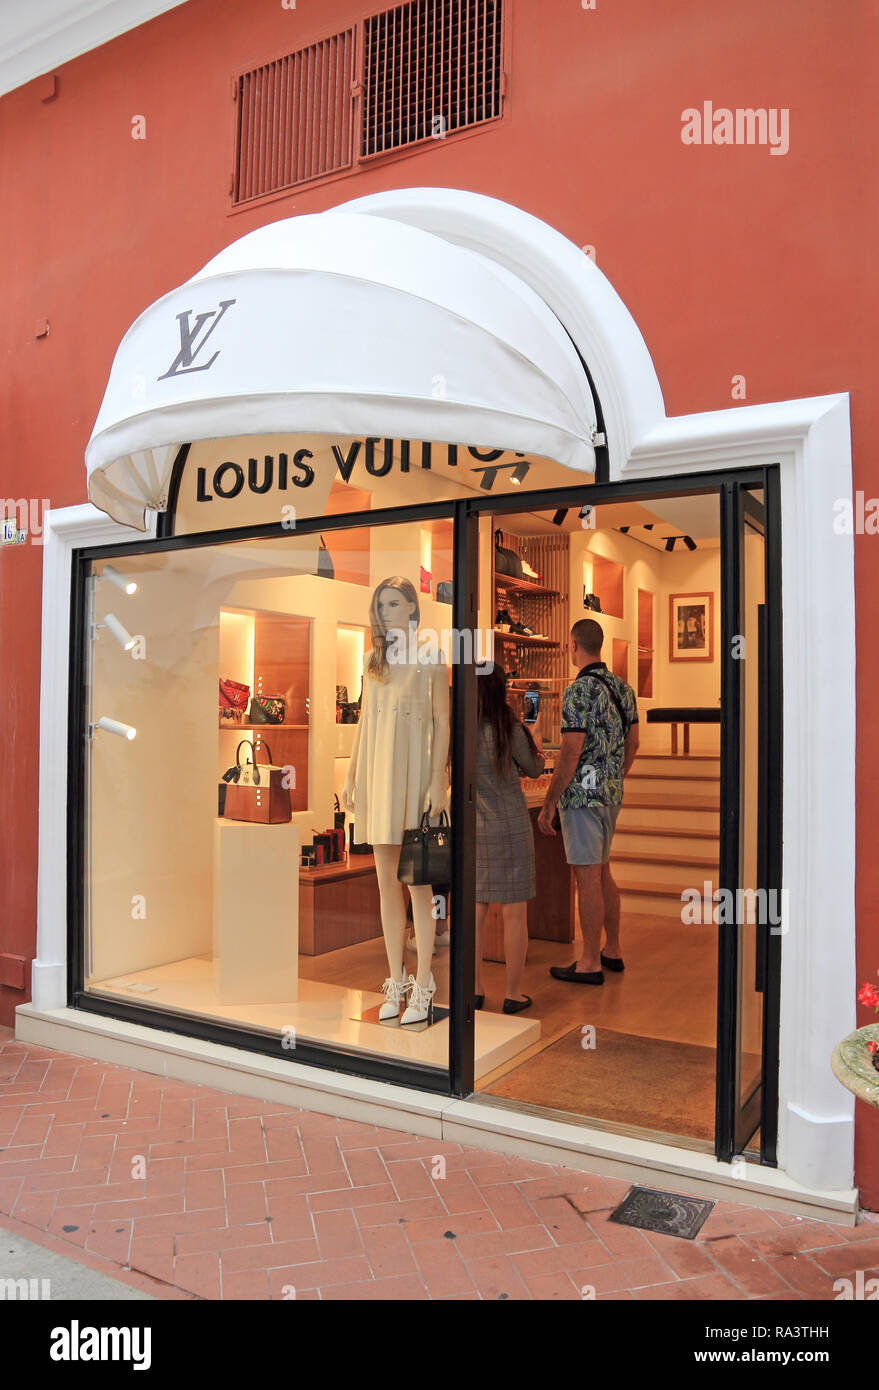 French fashion chain Louis Vuitton's store in Capri town, on the